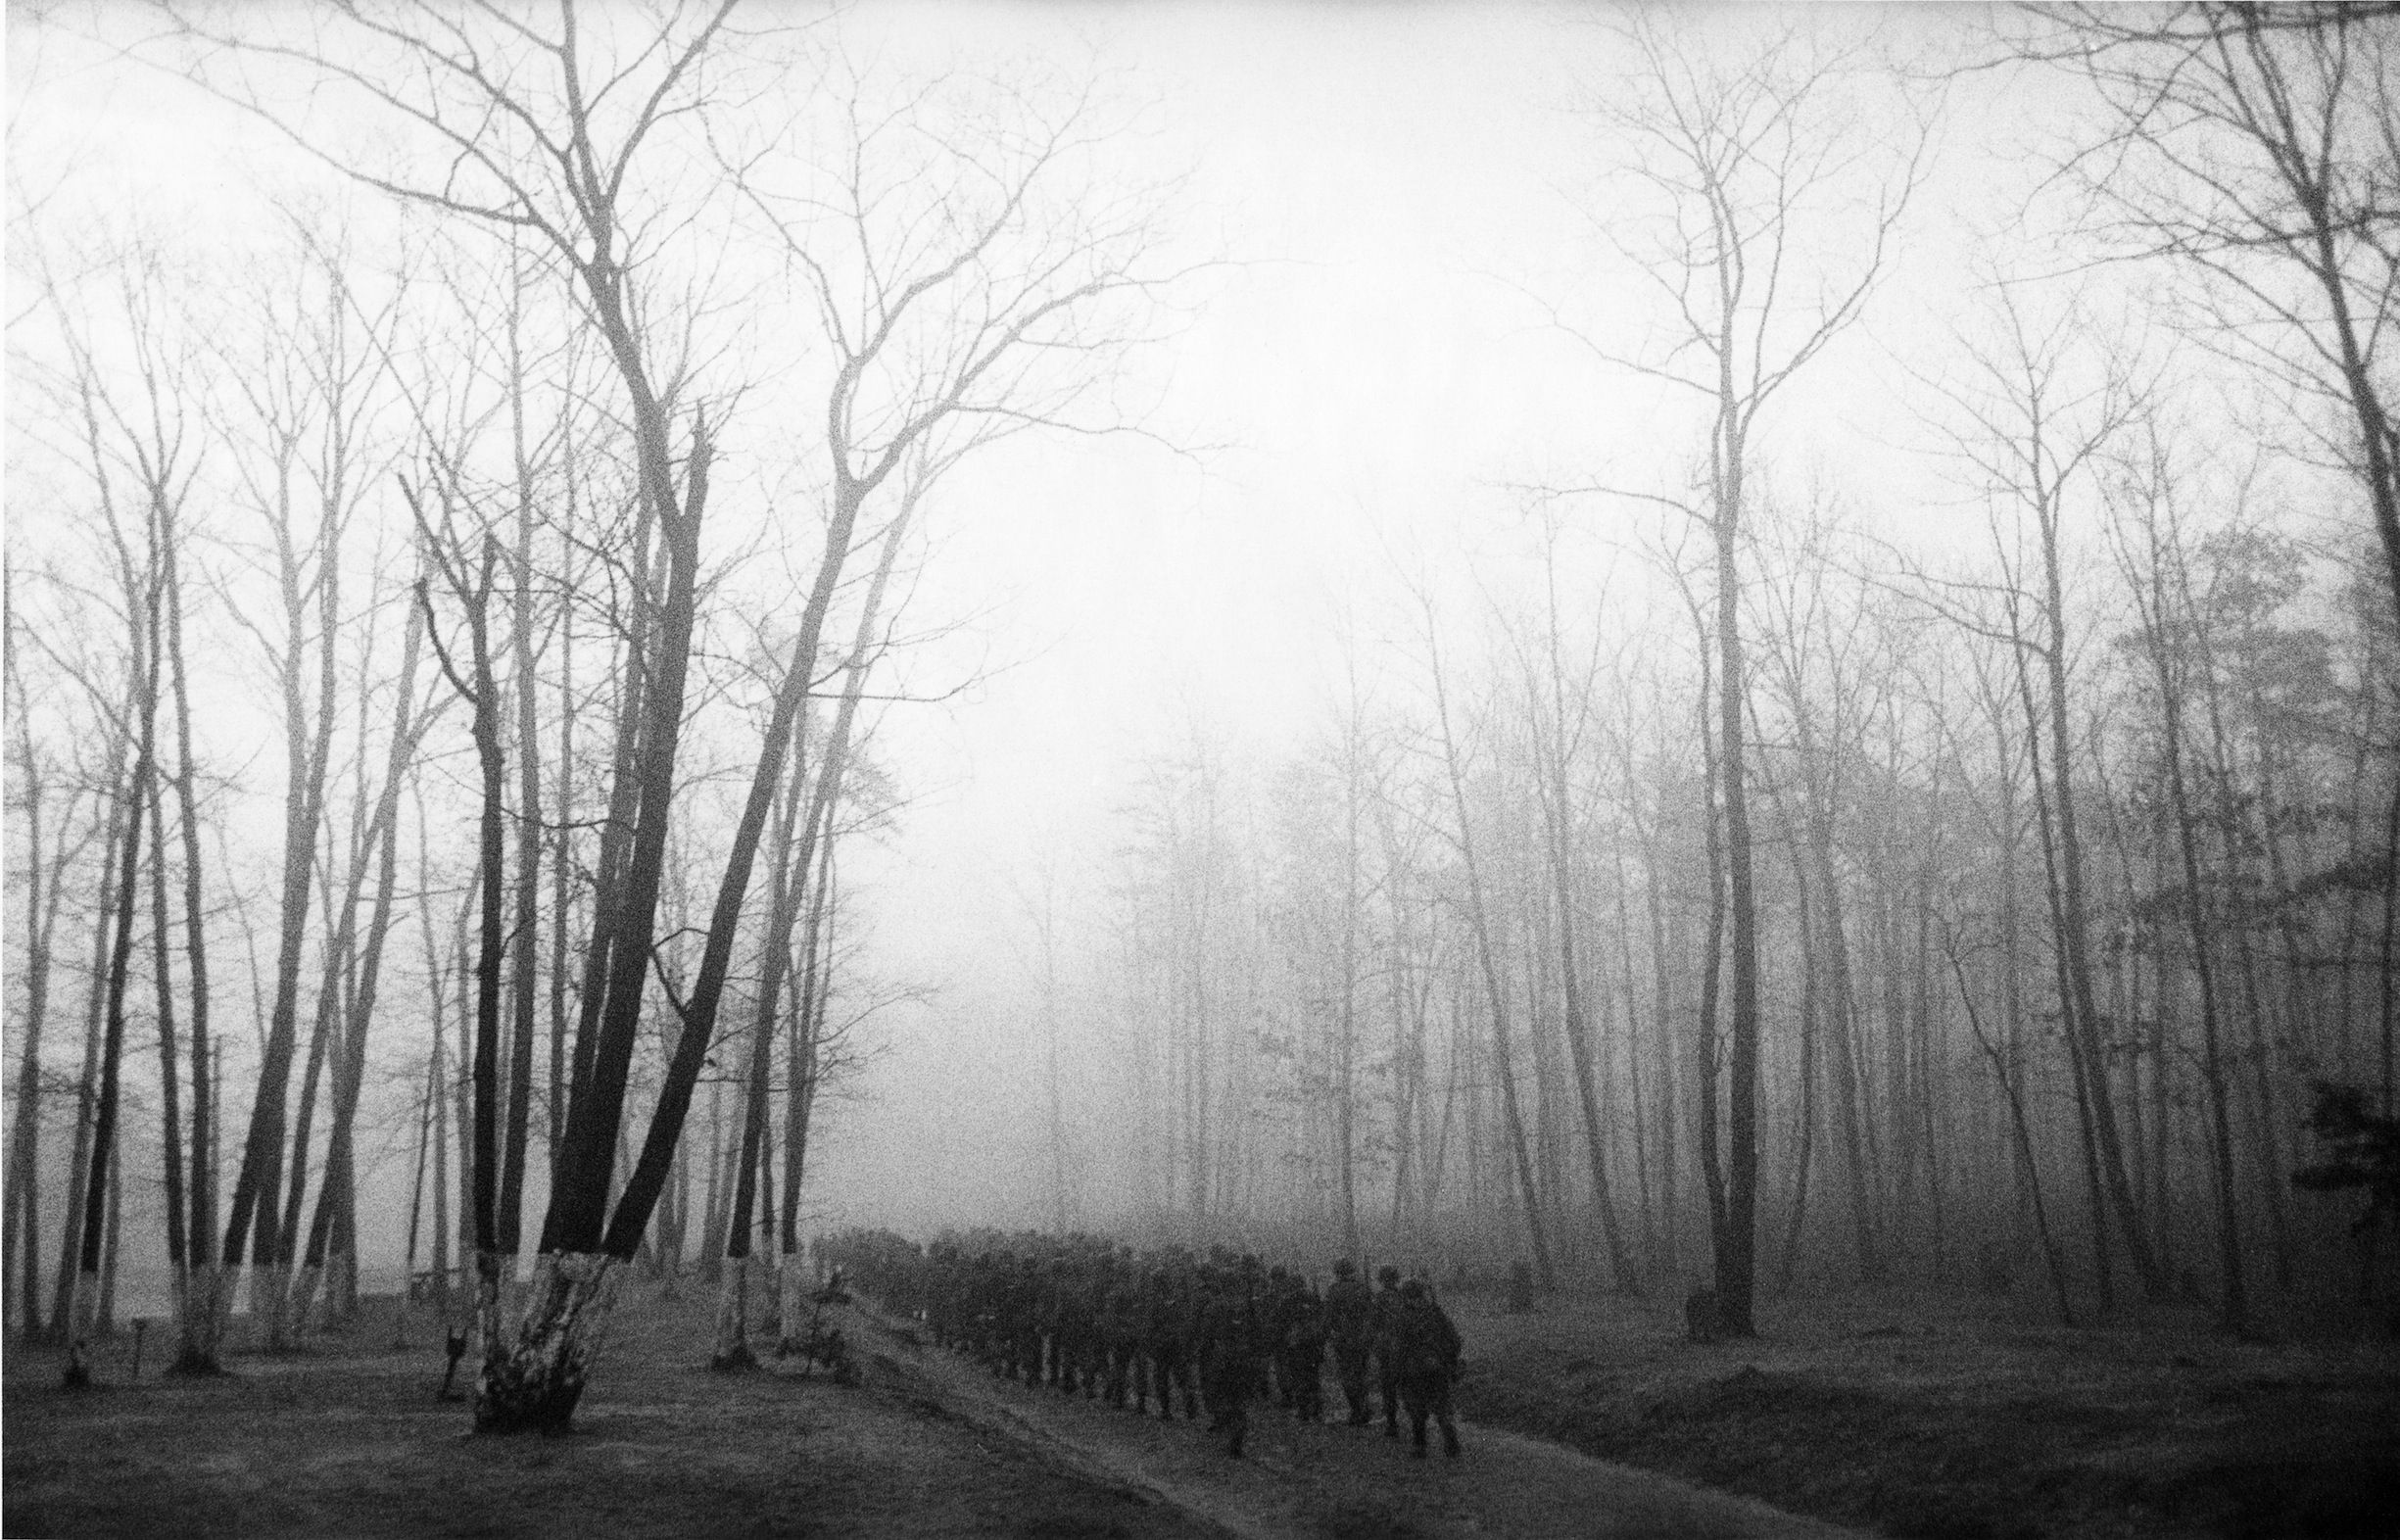 Marching in the Mist, 1952